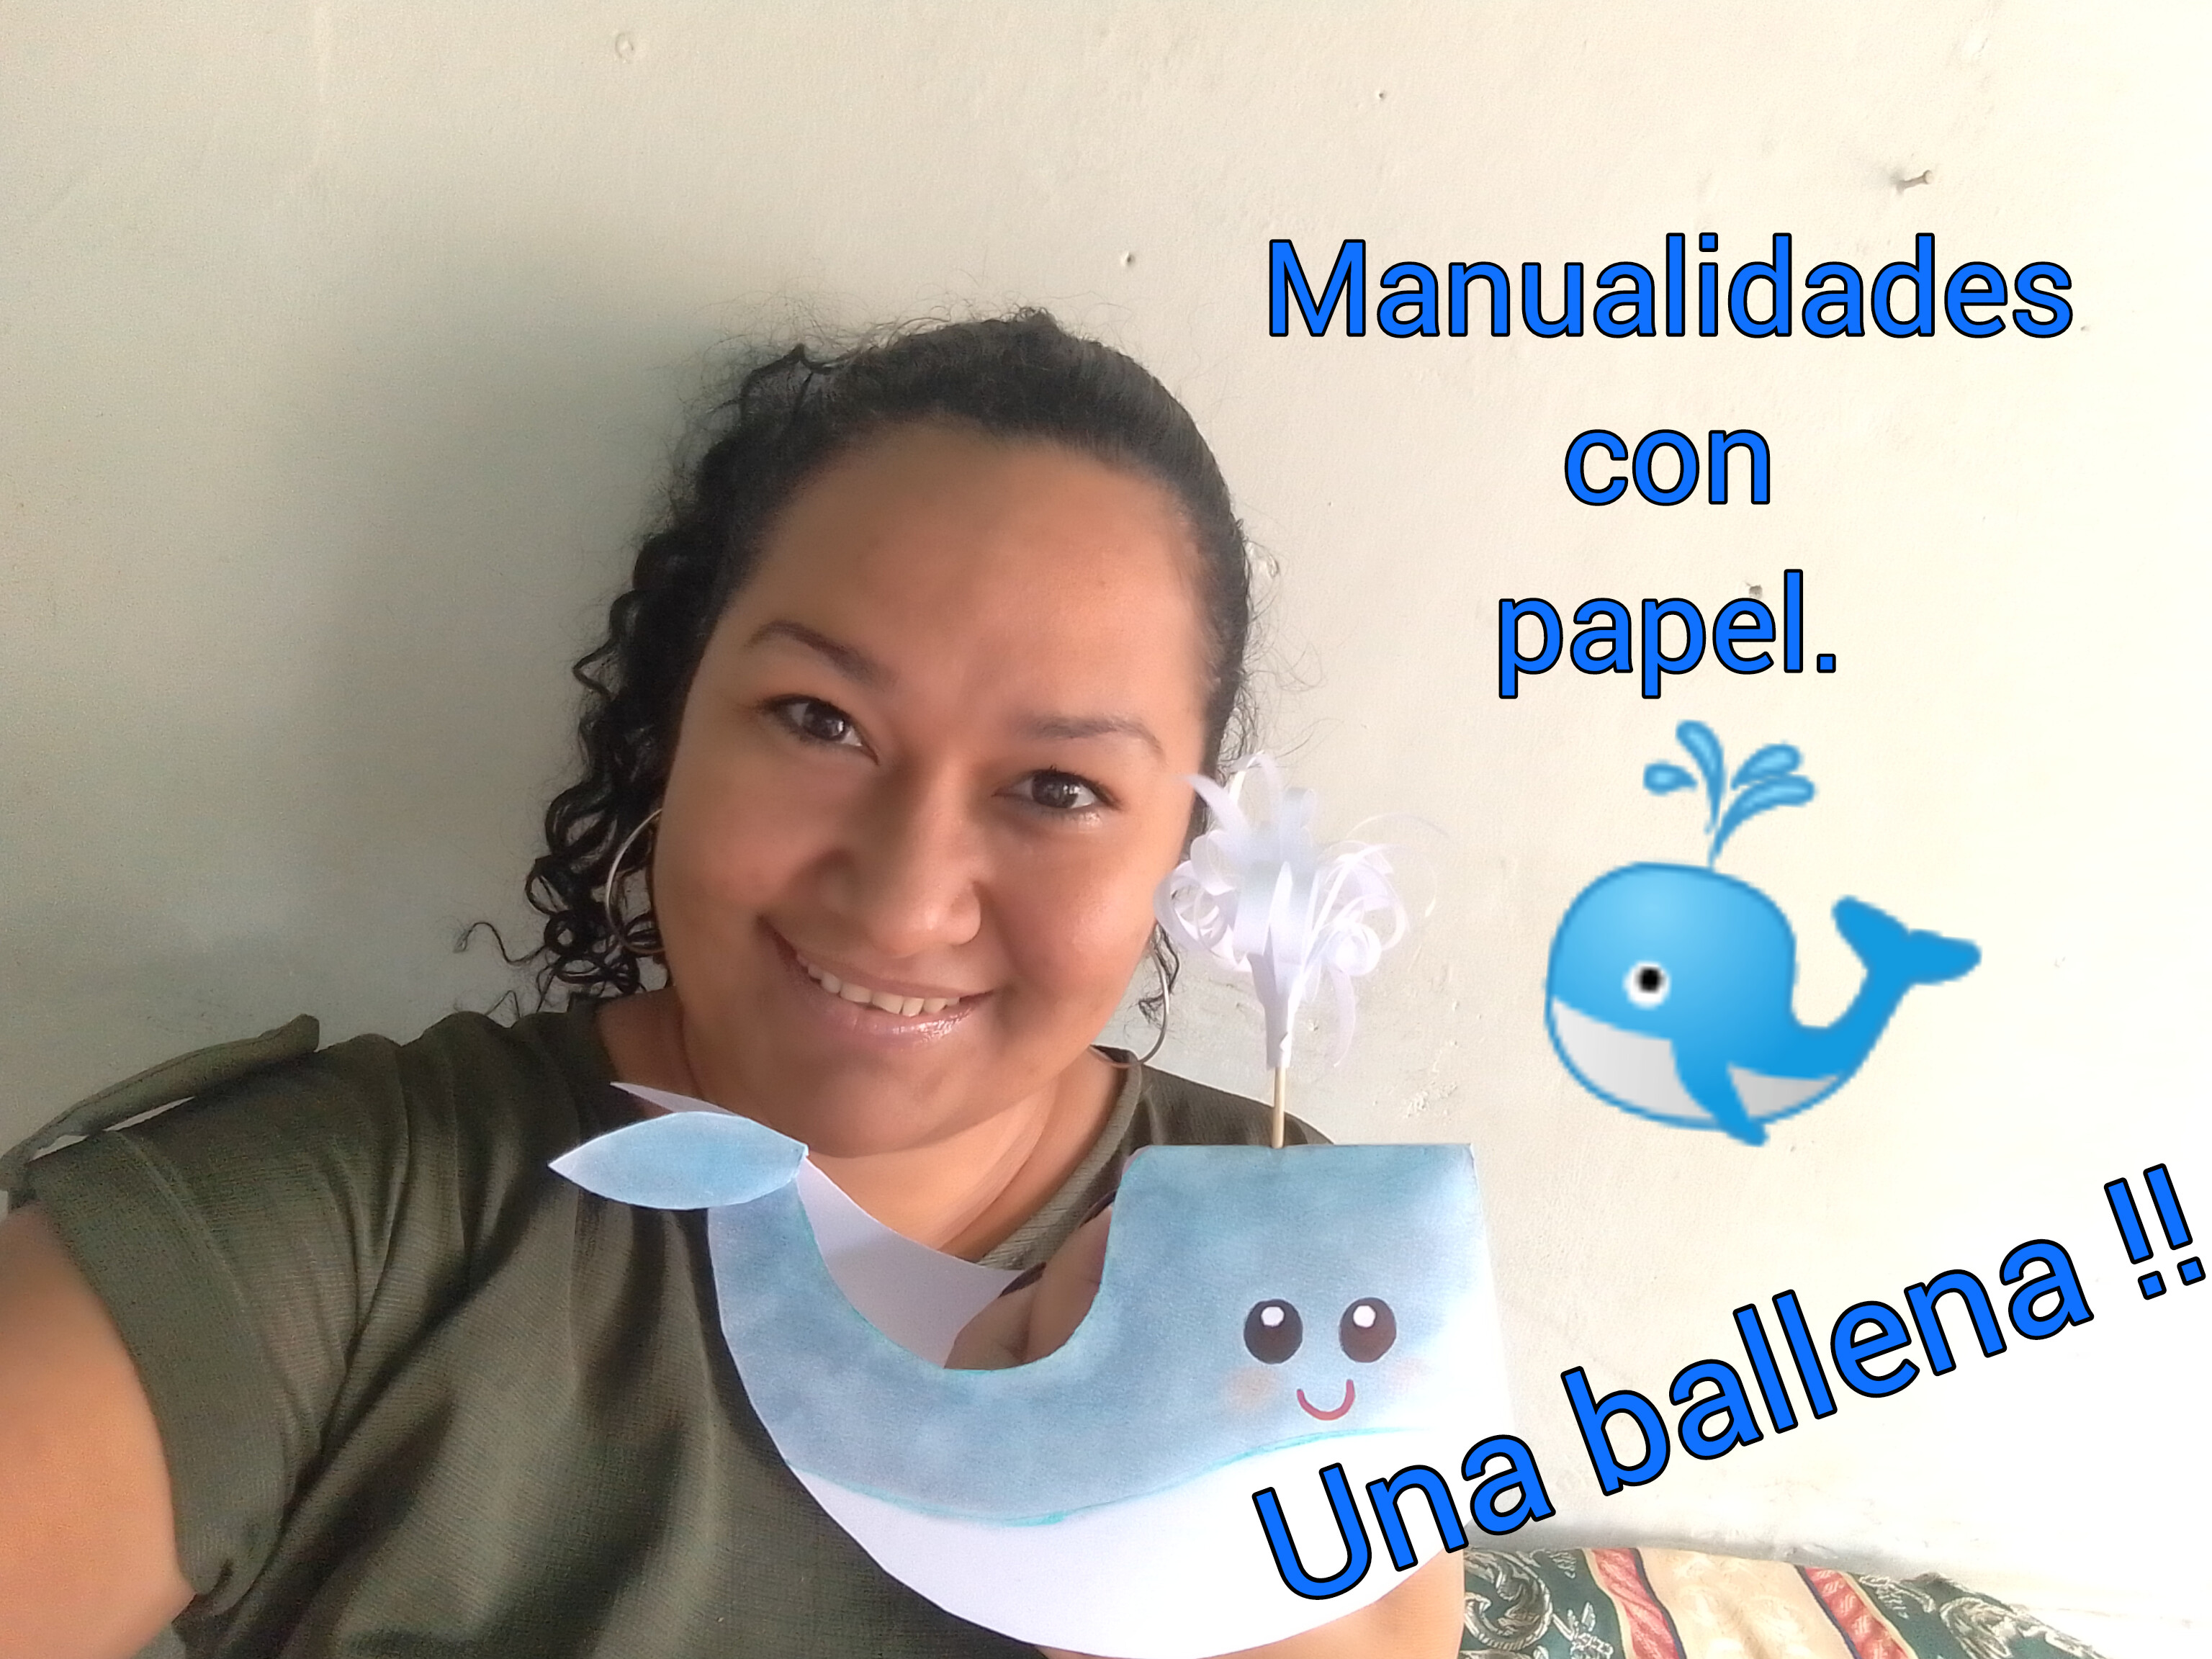 ESP-ENG] SEC-S10W4 / Manualidades con papel/ Paper Crafts. — Steemit, manualidades  papel crafting 